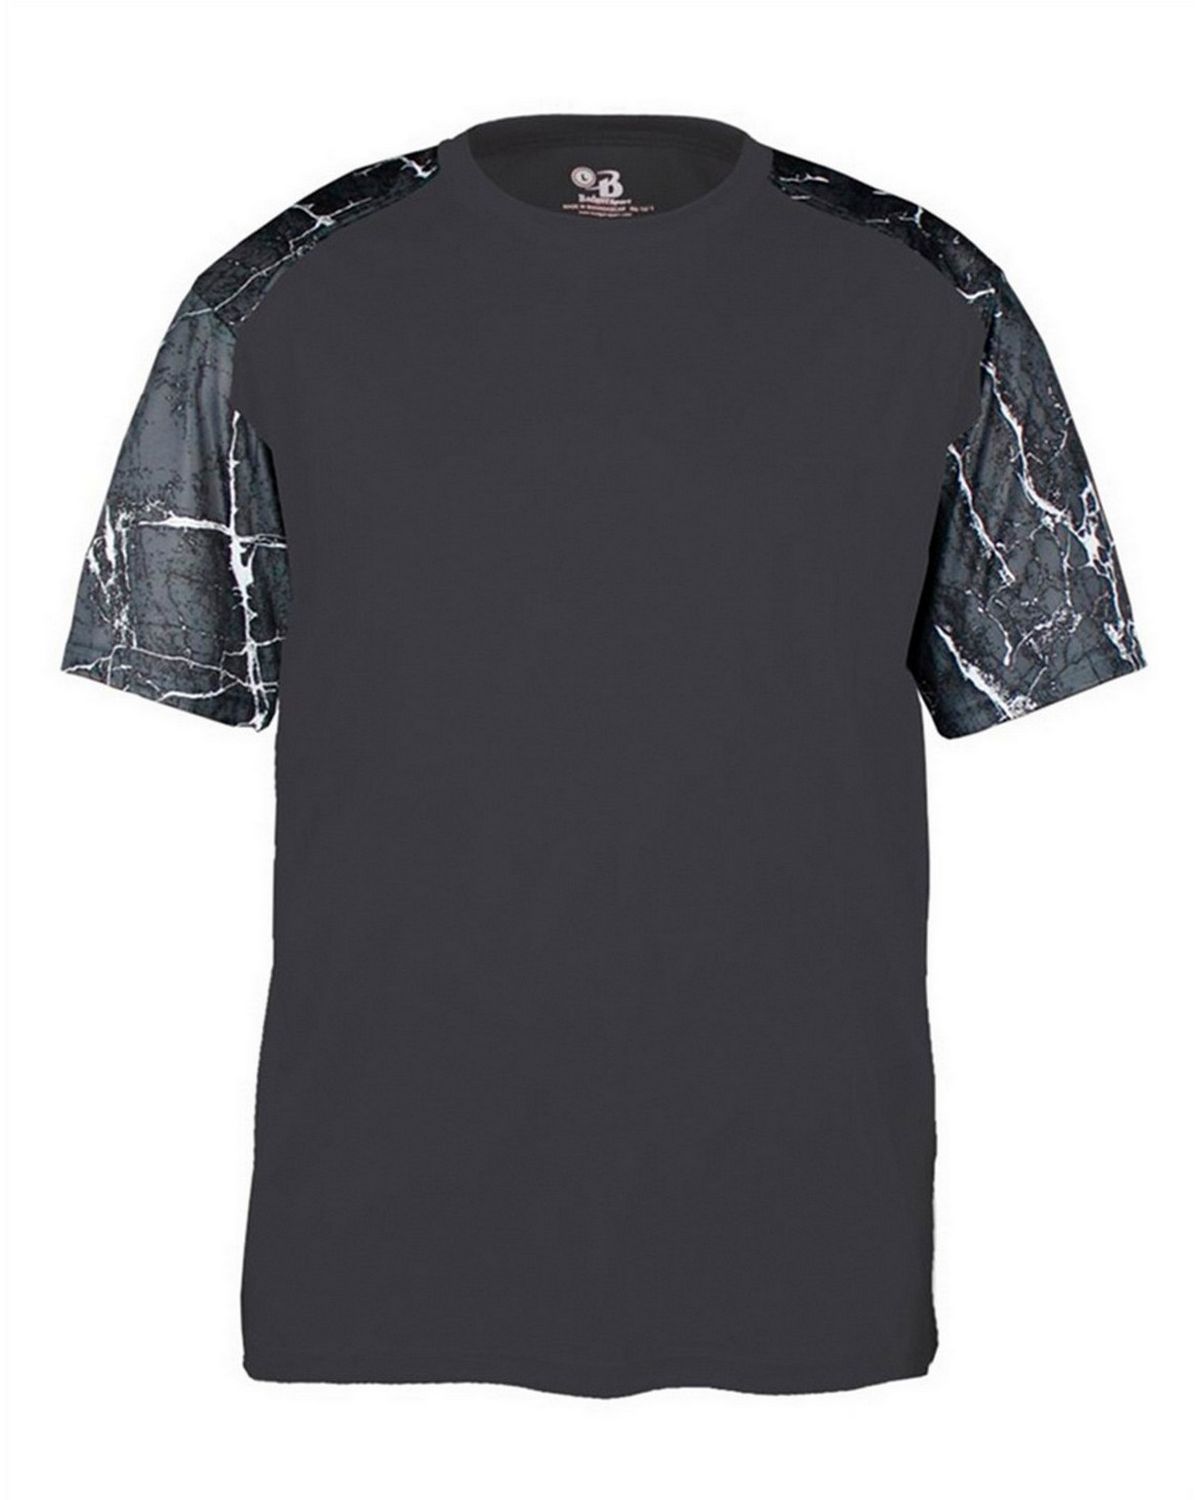 Badger 2143 Youth Shock Sport Tee